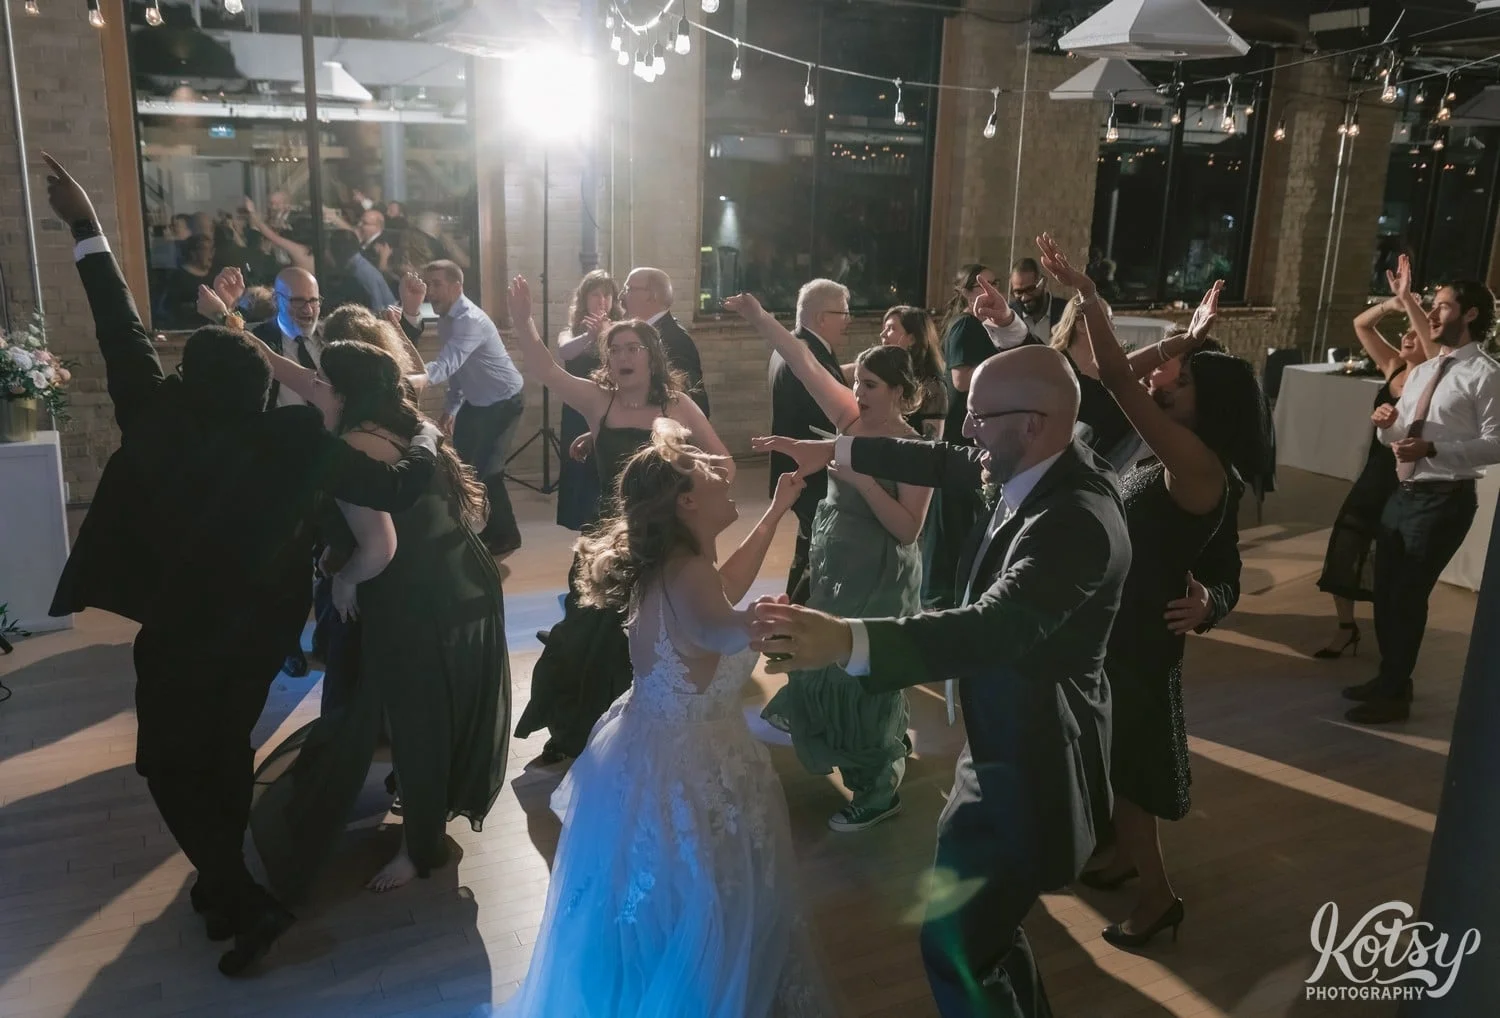 A large group of people dance with their hands in the air during a Second Floor Events wedding reception in Toronto, Canada.